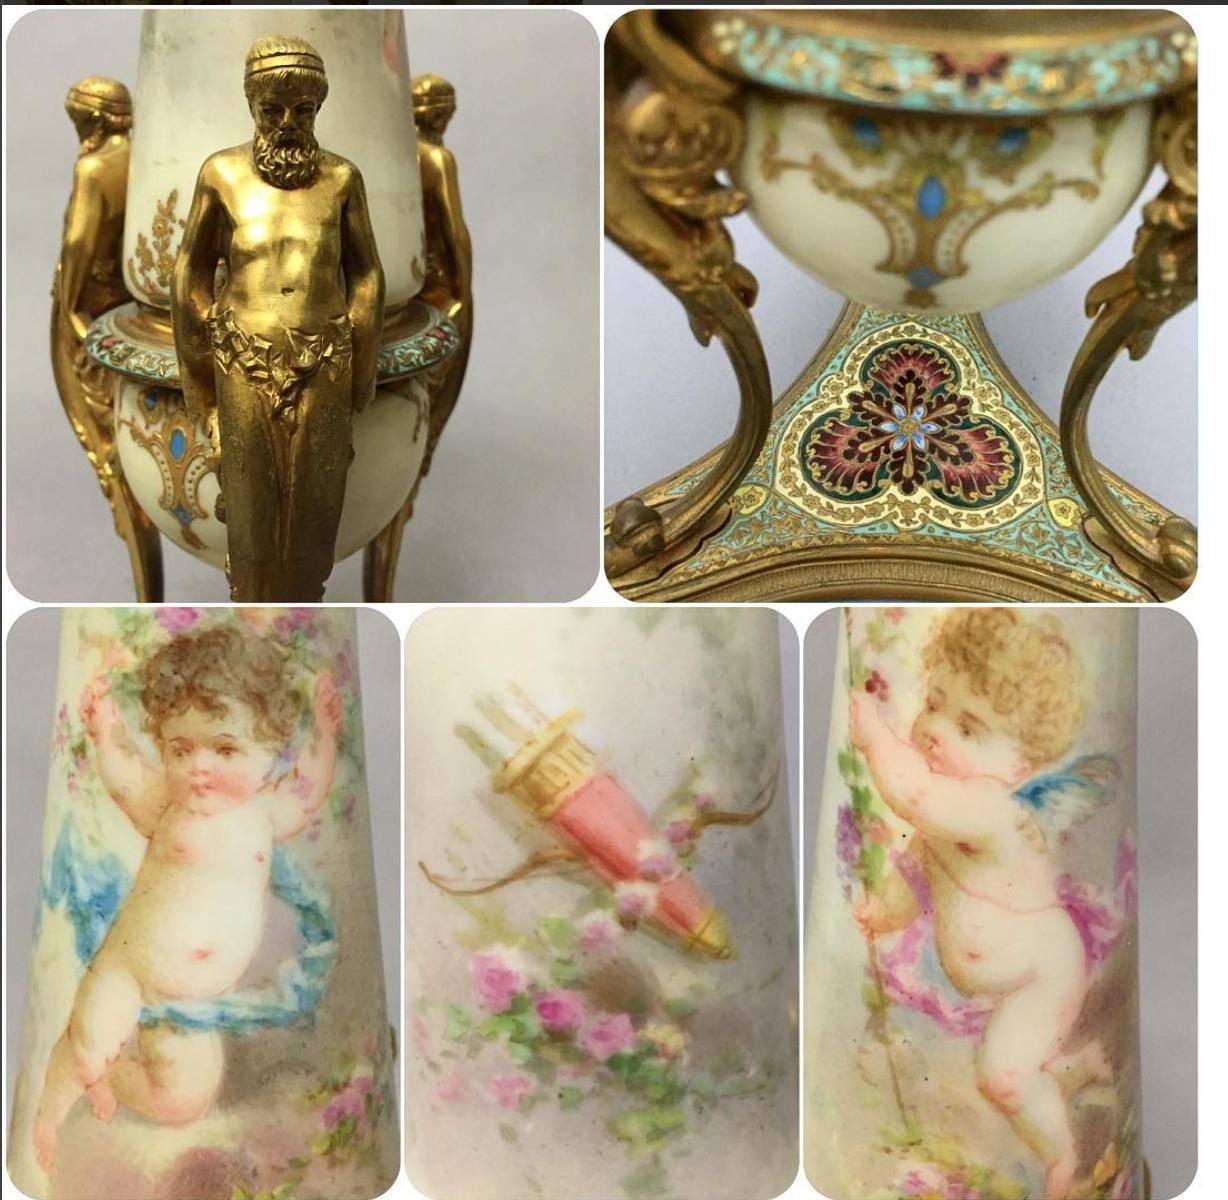 A lovely pair of French bud vases made of painted porcelain with gilt-bronze mounts, base and flaring neck. The body is painted with little putti surrounded by flowers. On the reverse side of one there is a cupid’s bow and arrows, whilst the other